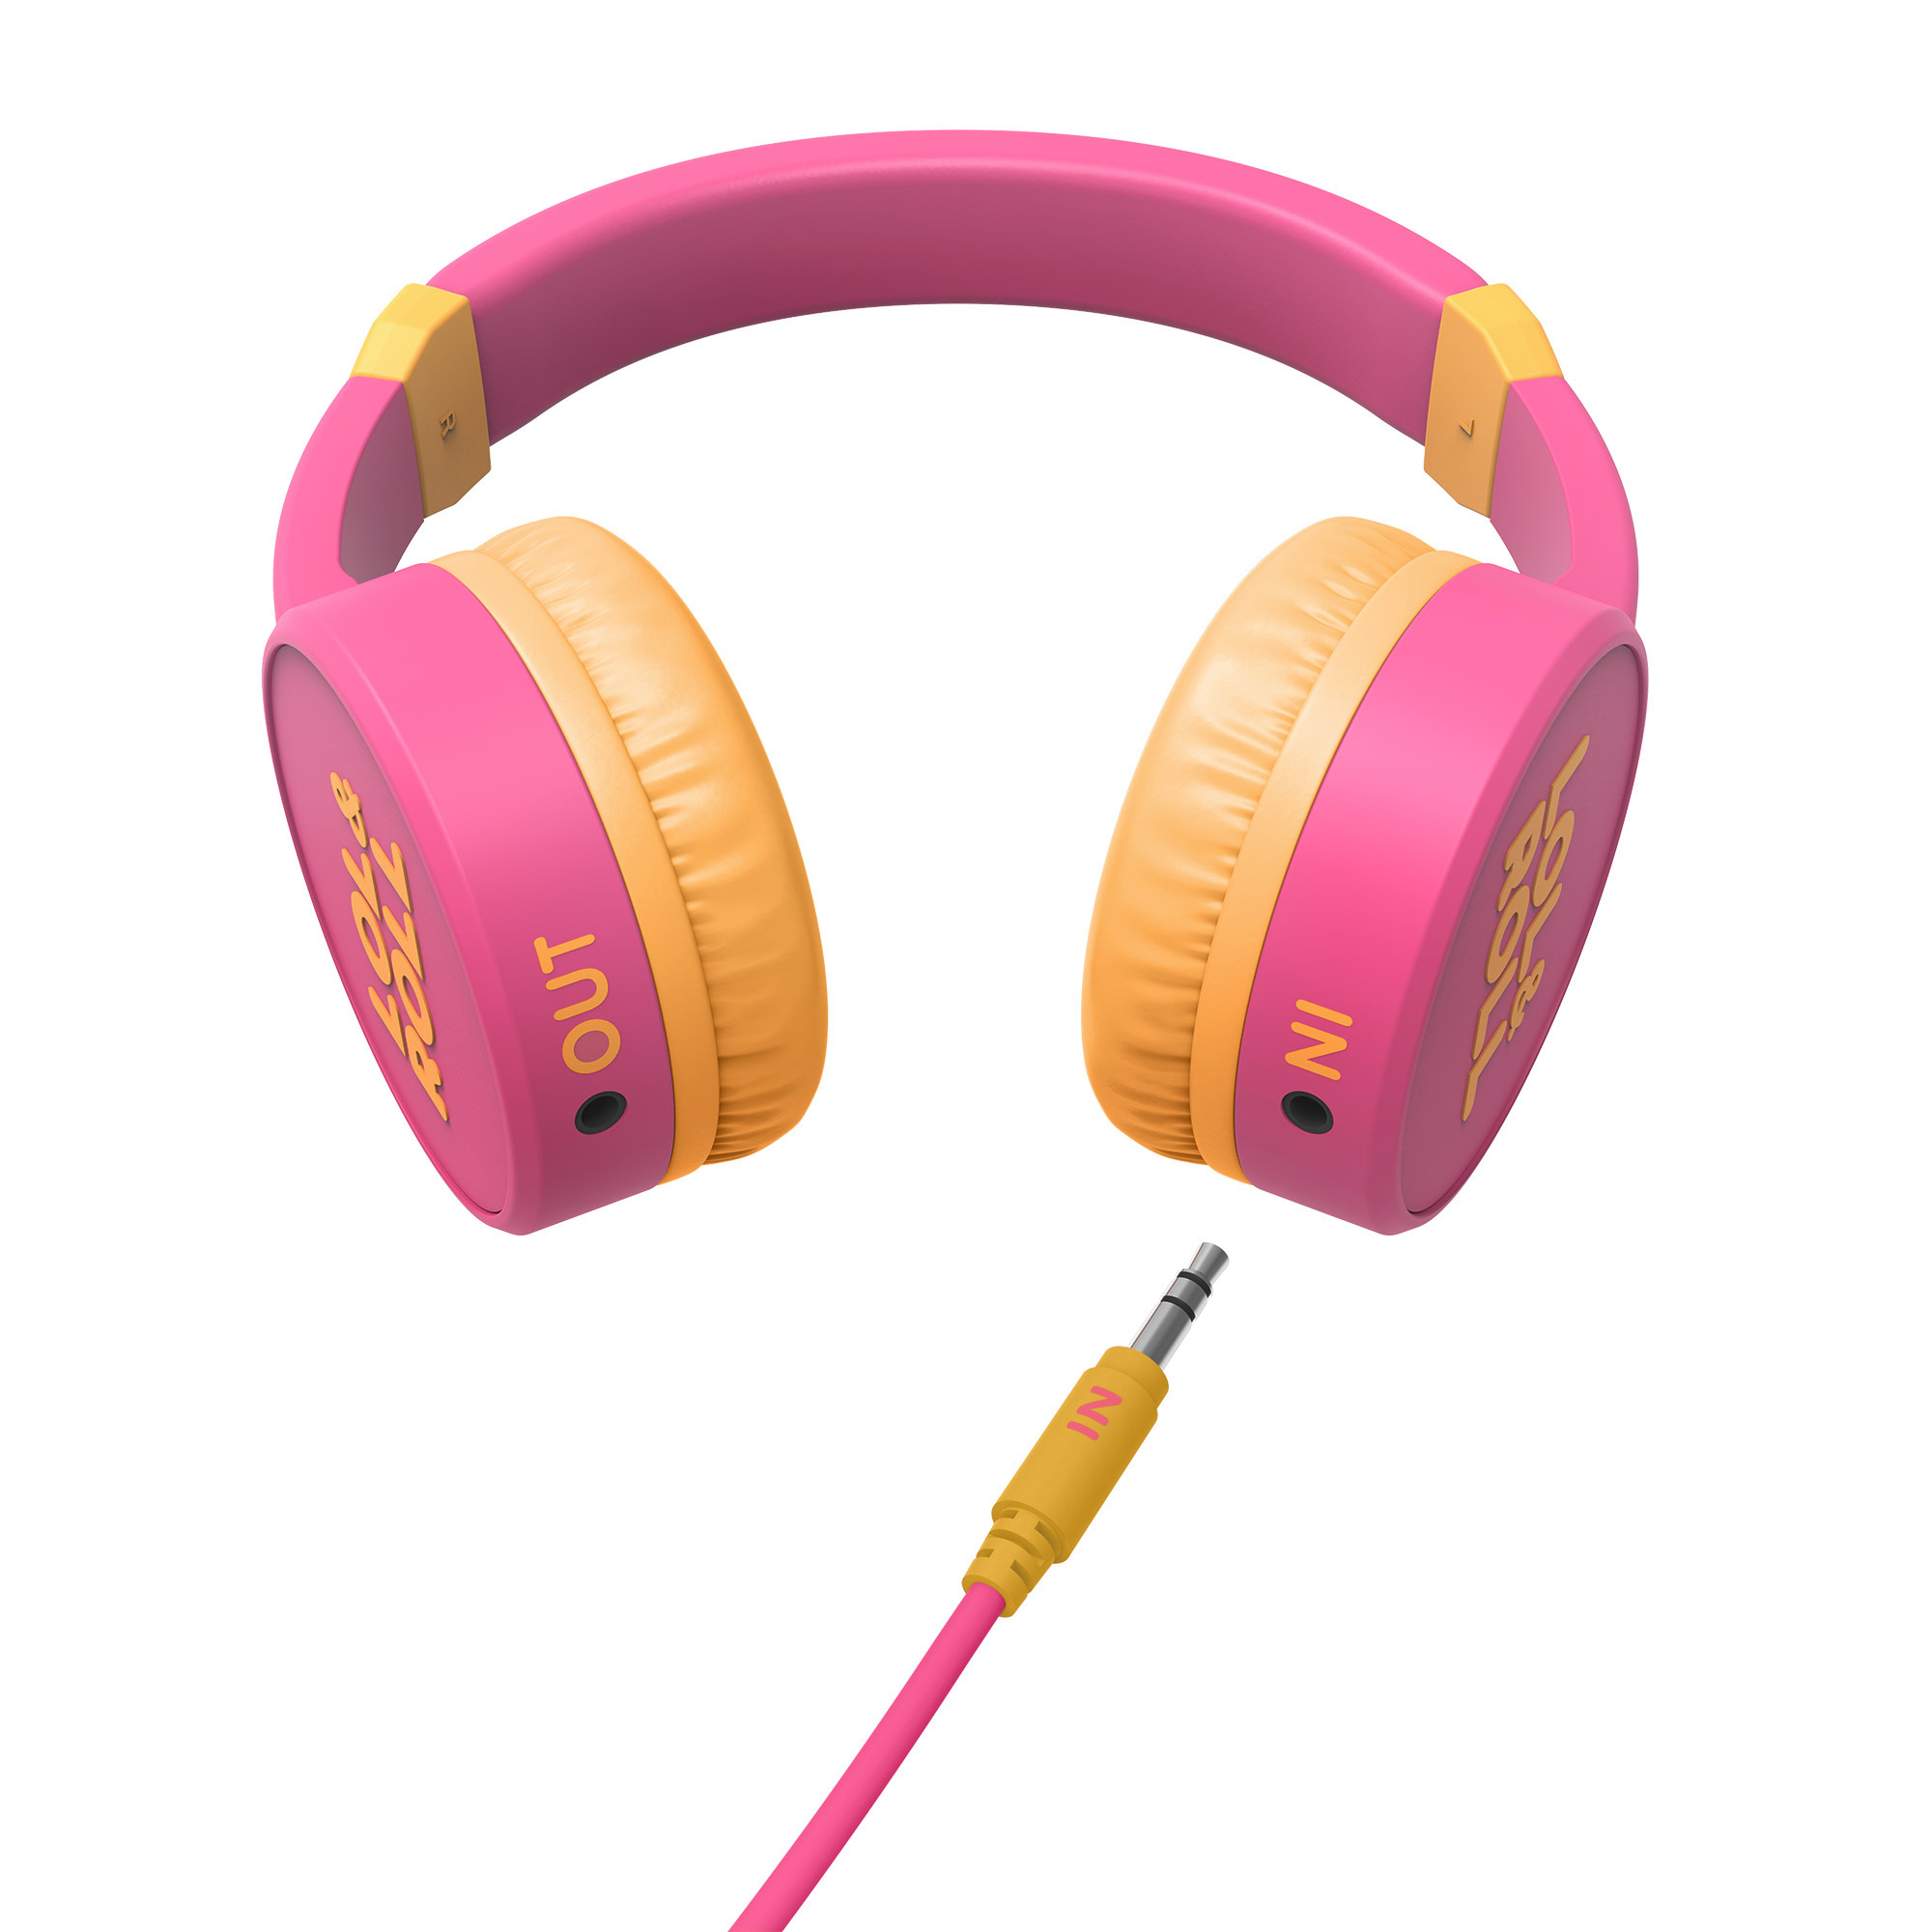 Children's music headset with detachable cable